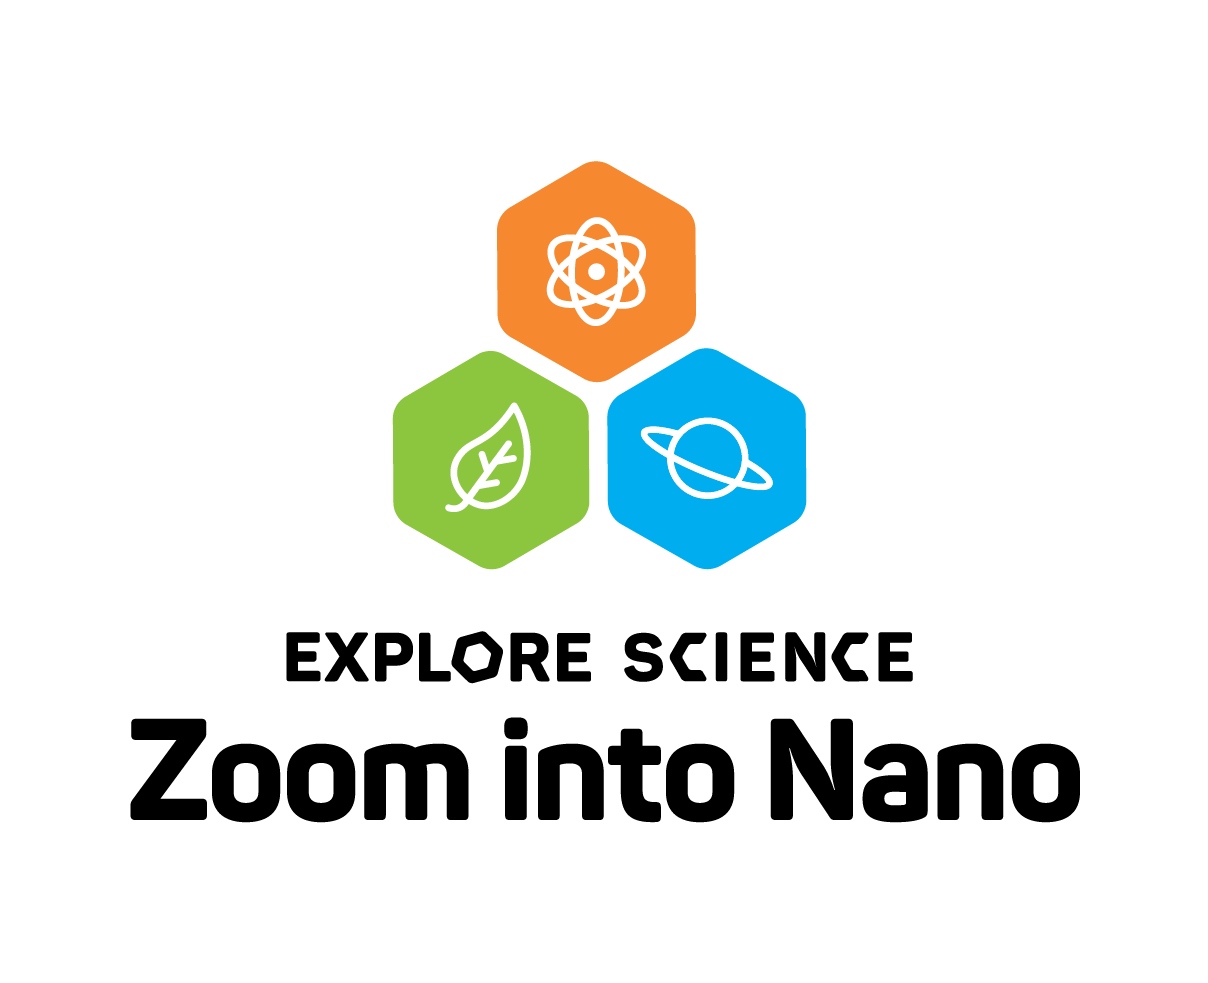 Explore science zoom into nano logo in full color with leaf, atom, and Saturn logo